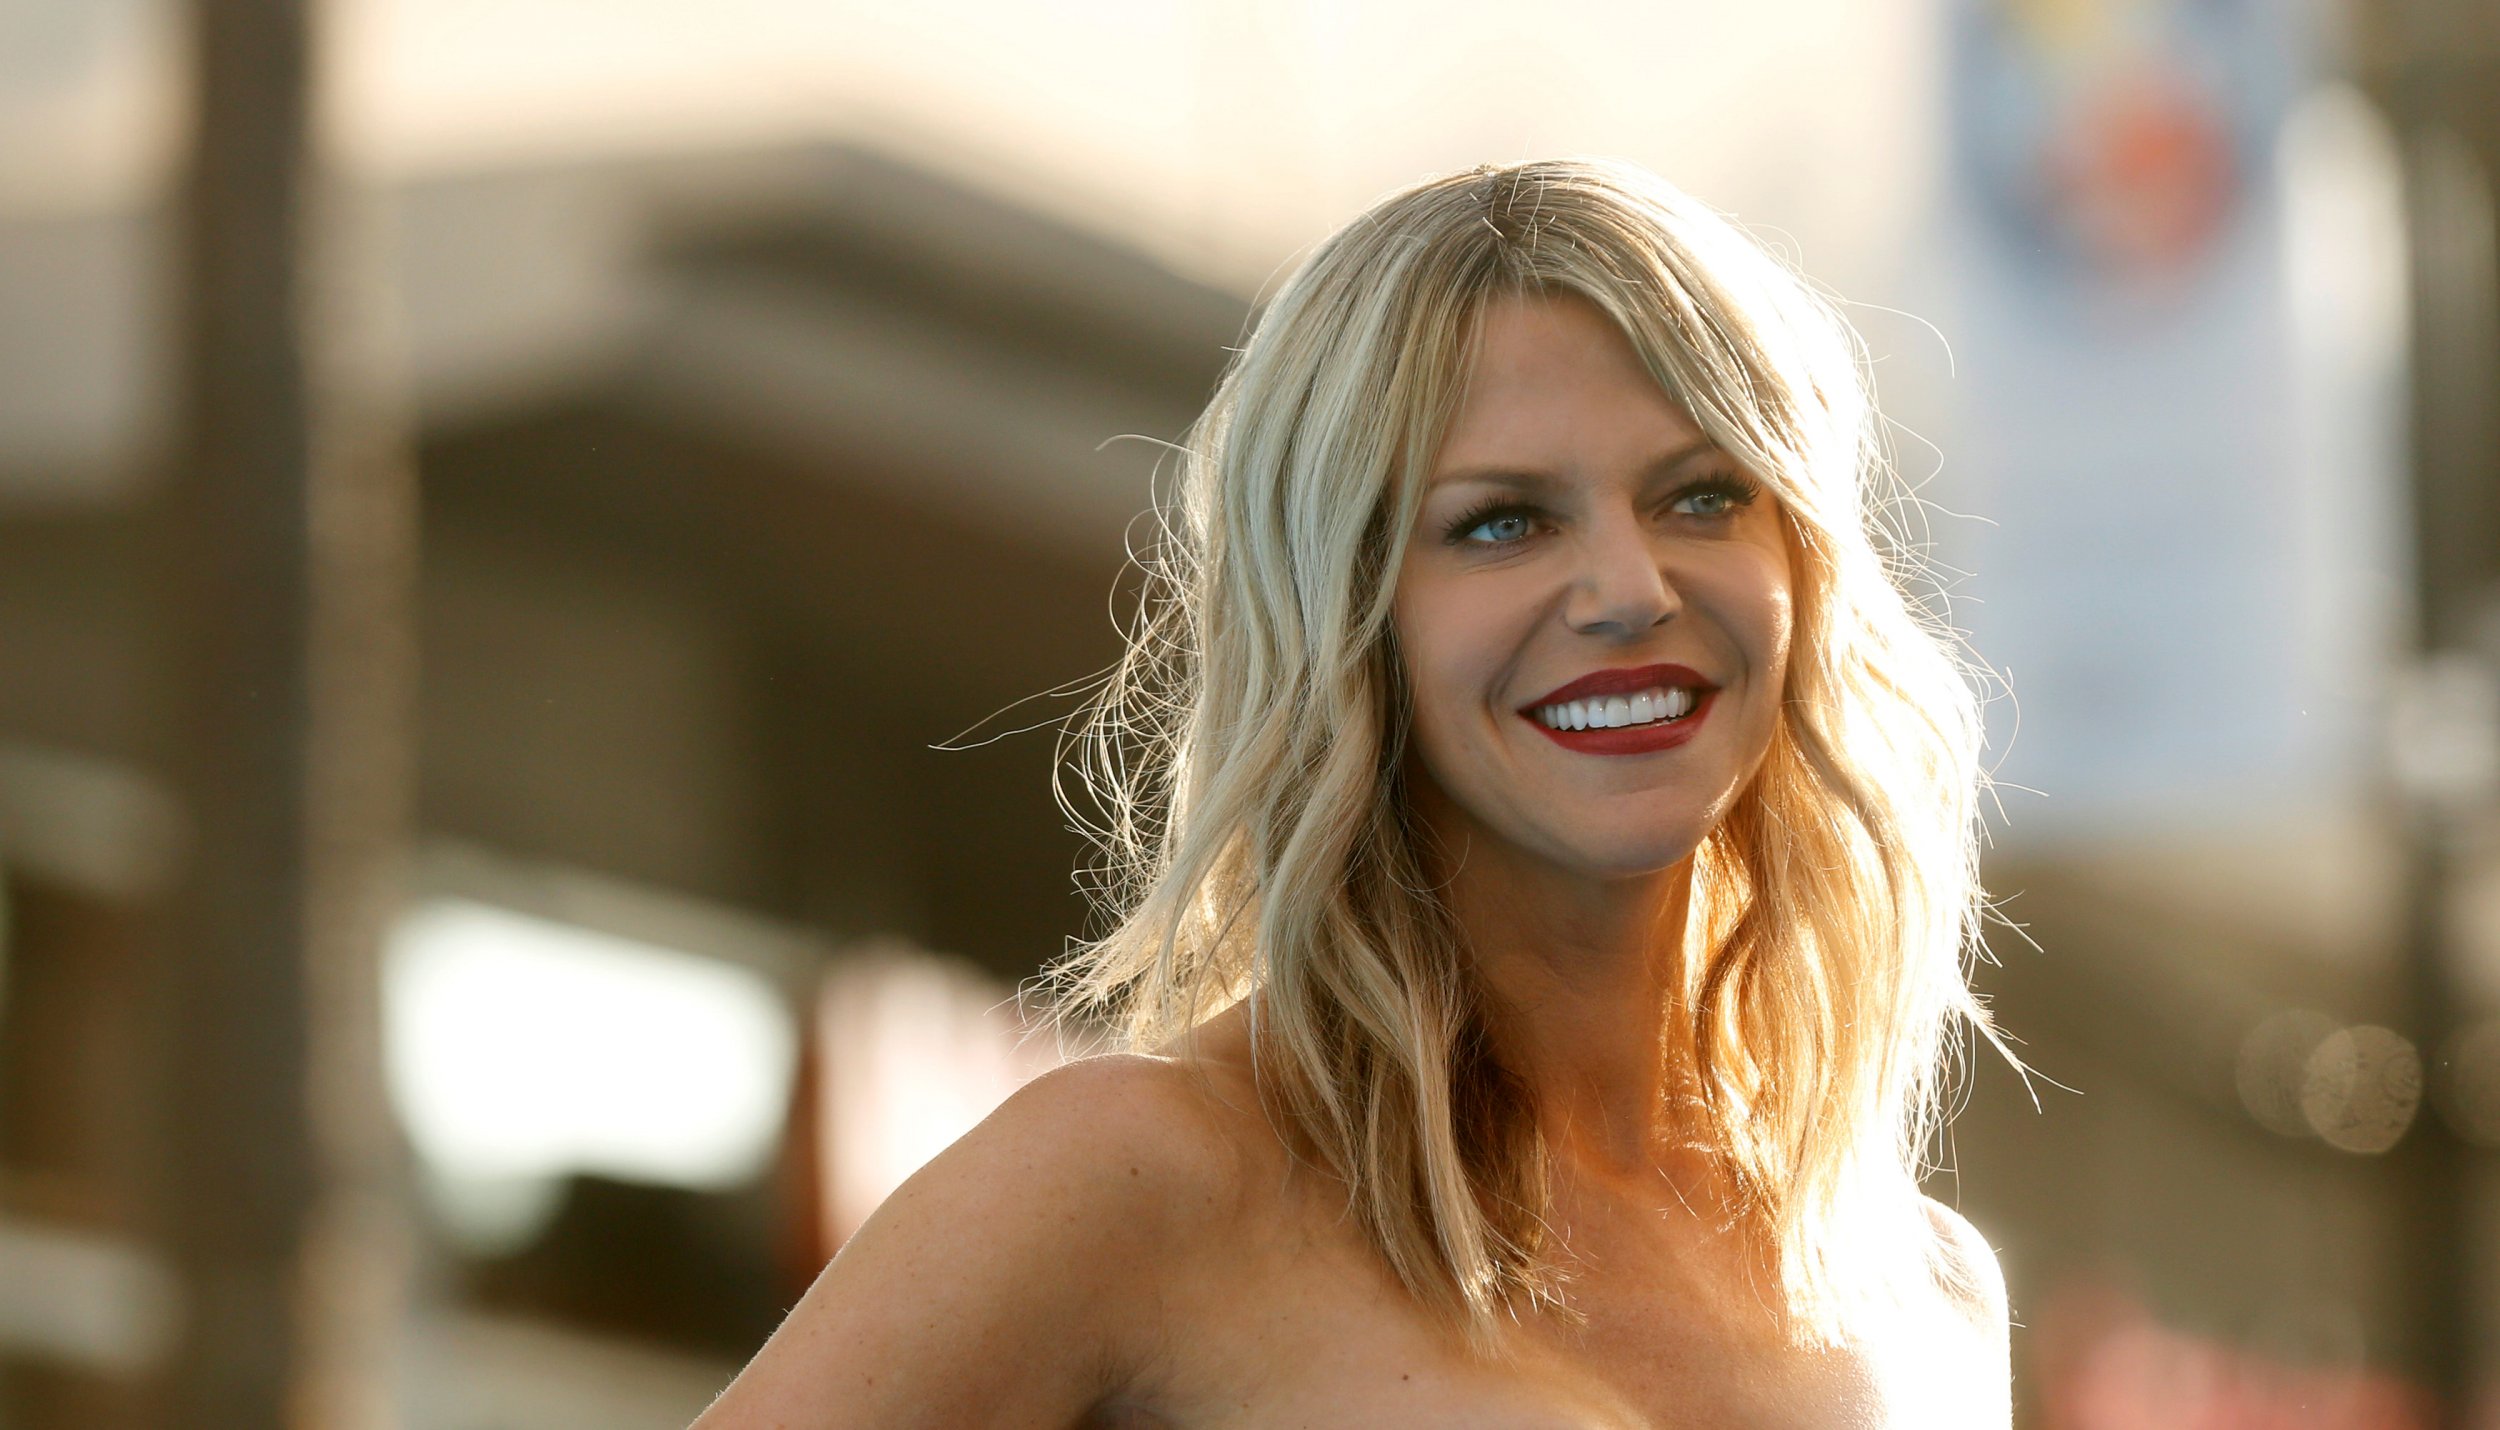 daniel rabot recommends kaitlin olson naked pic